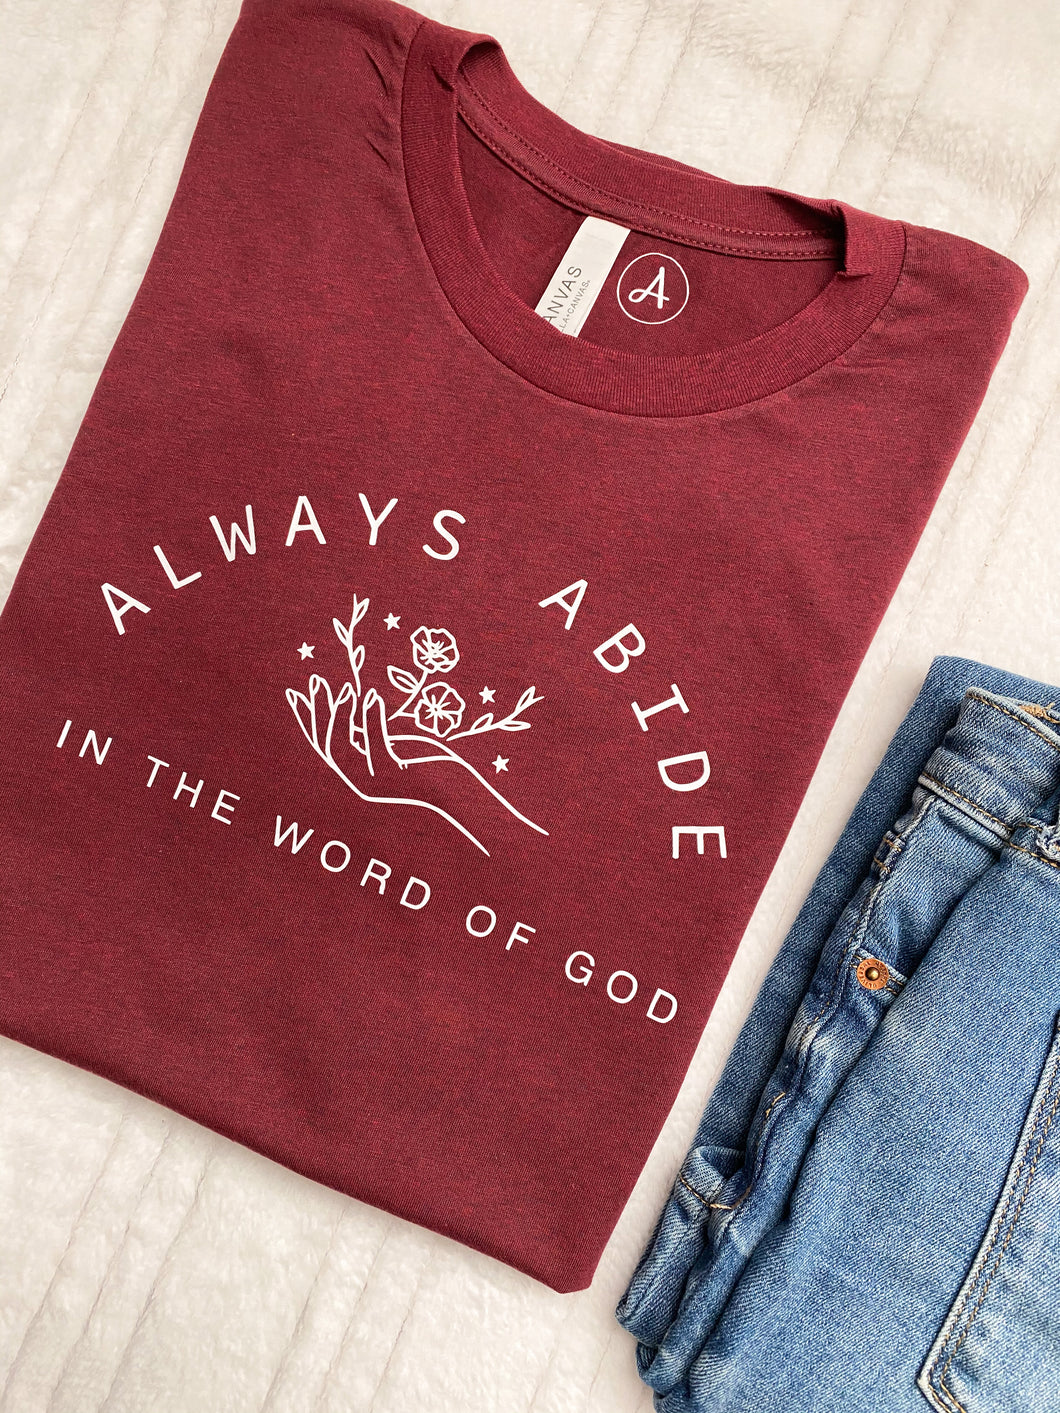 Abide In the word of God Shirt